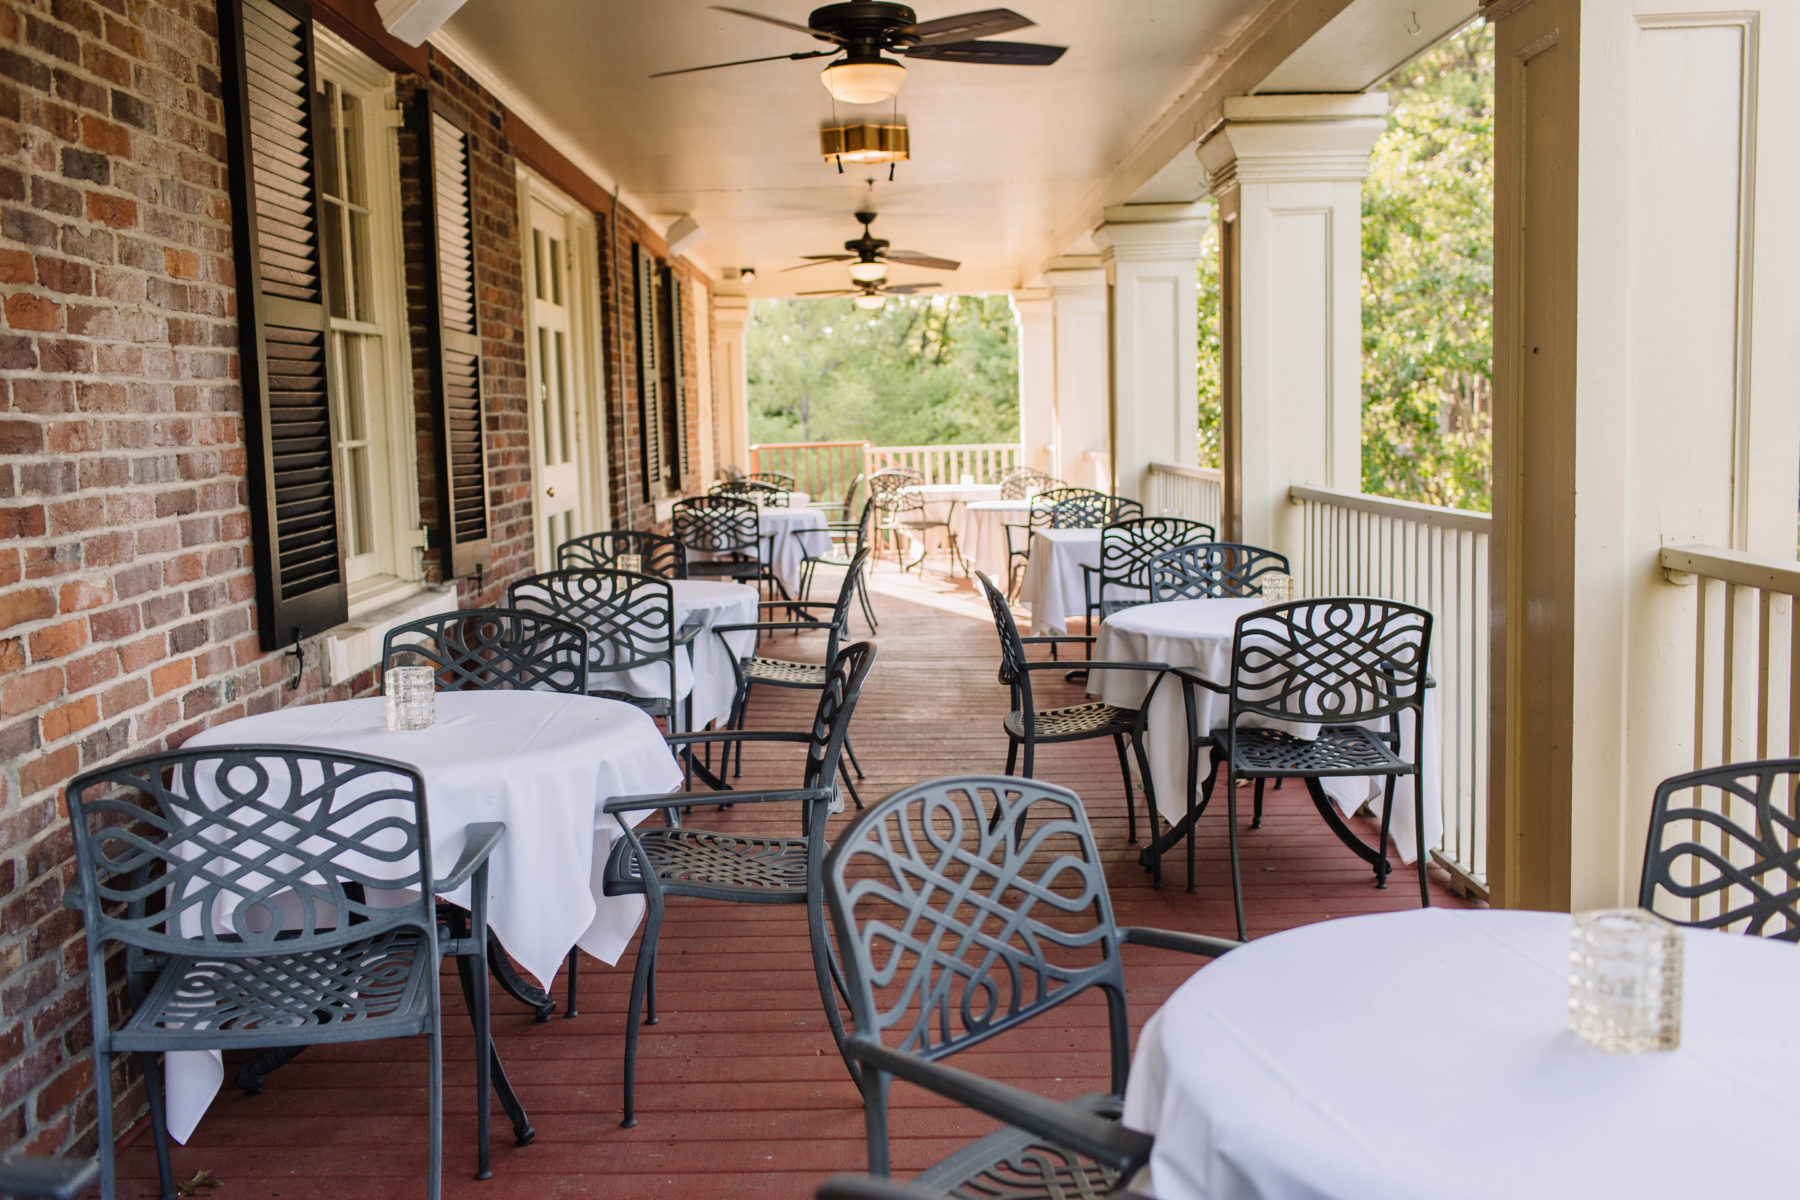 Room Options for Your Rehearsal Dinner at Mere Bulles featured on Nashville Bride Guide